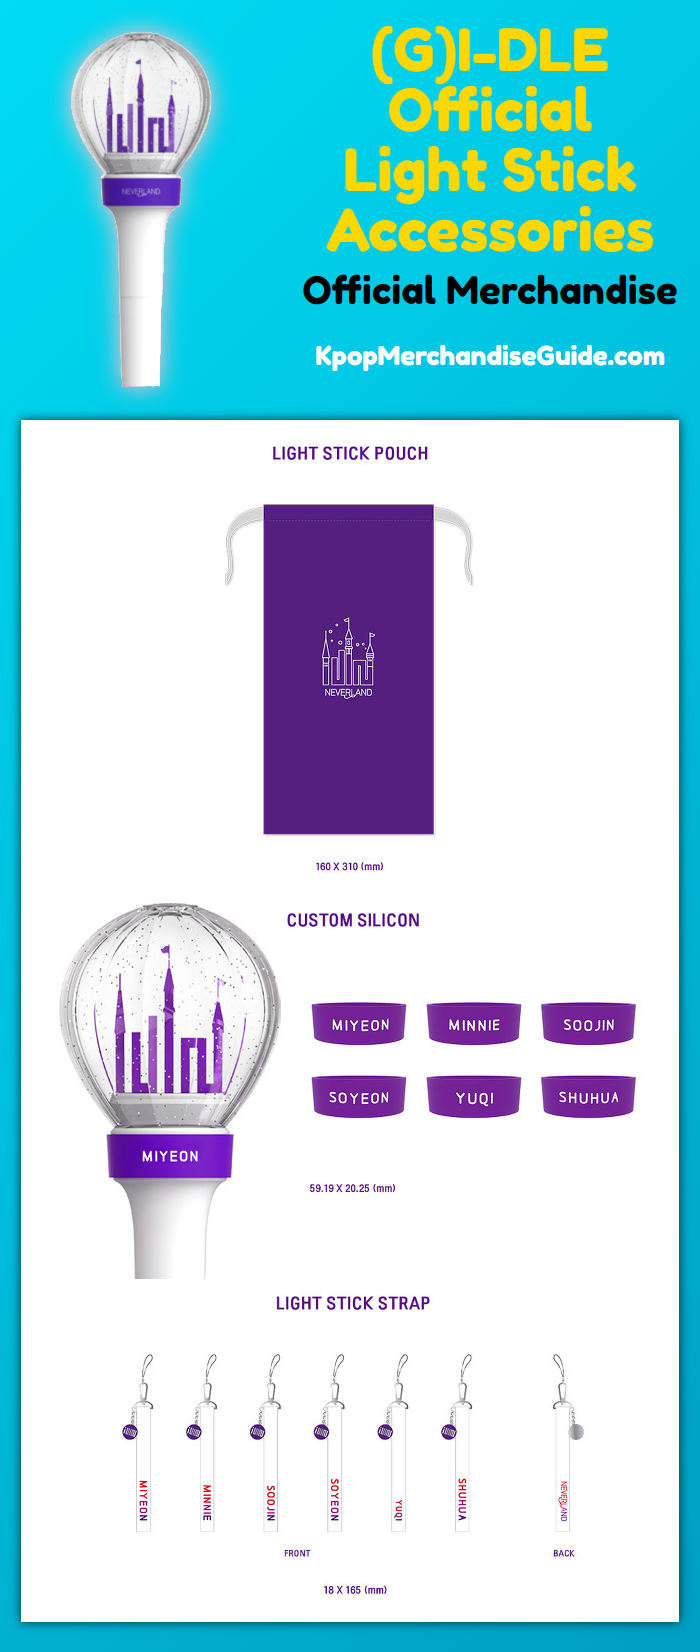 (G)I-DLE Official Light Stick Accessories